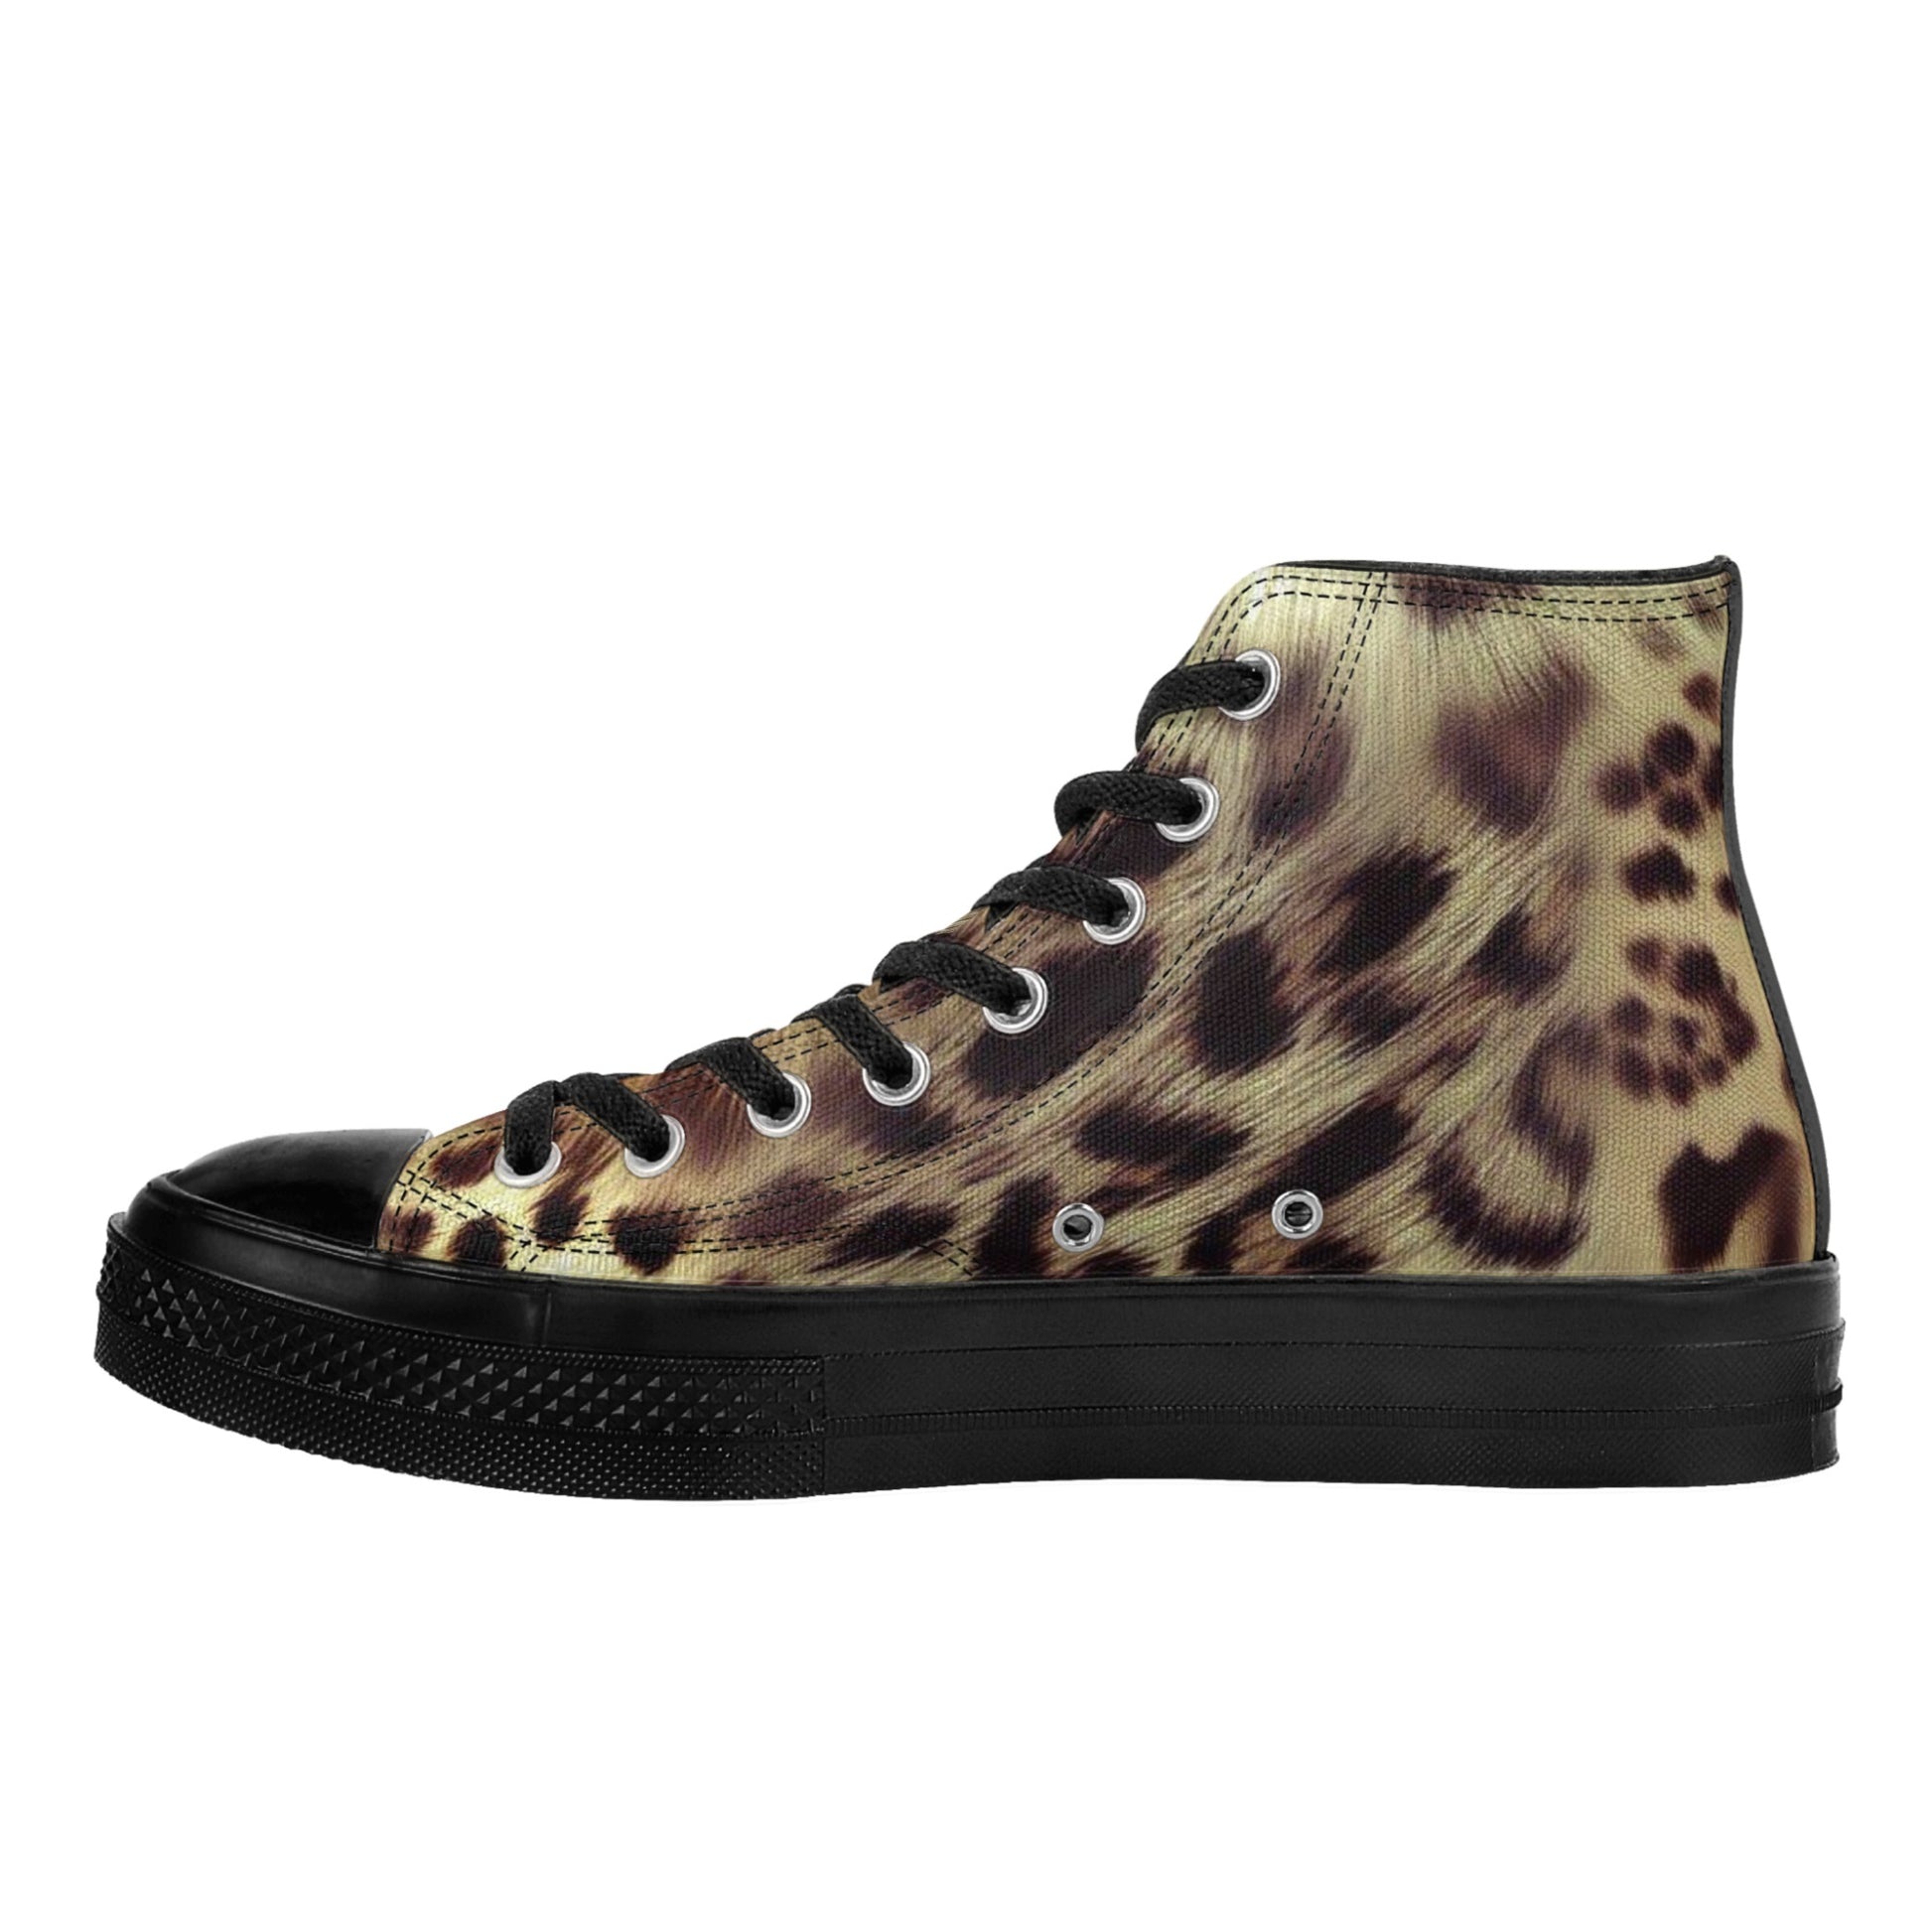 Wild Style: Canvas Shoes Featuring Striking Leopard Print